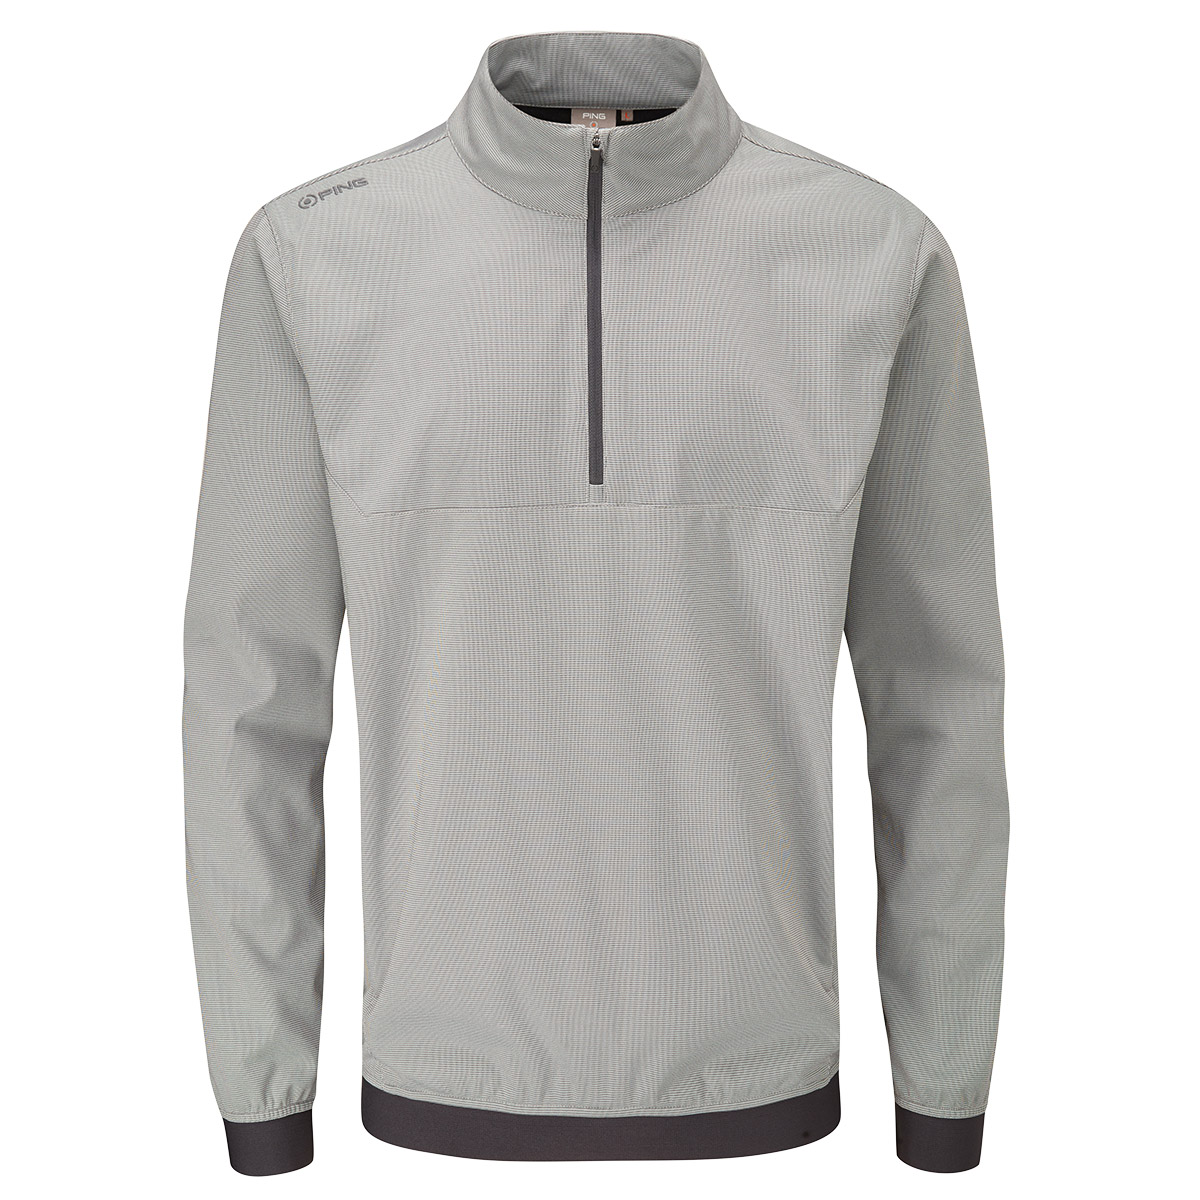 PING Impact Jacket from american golf